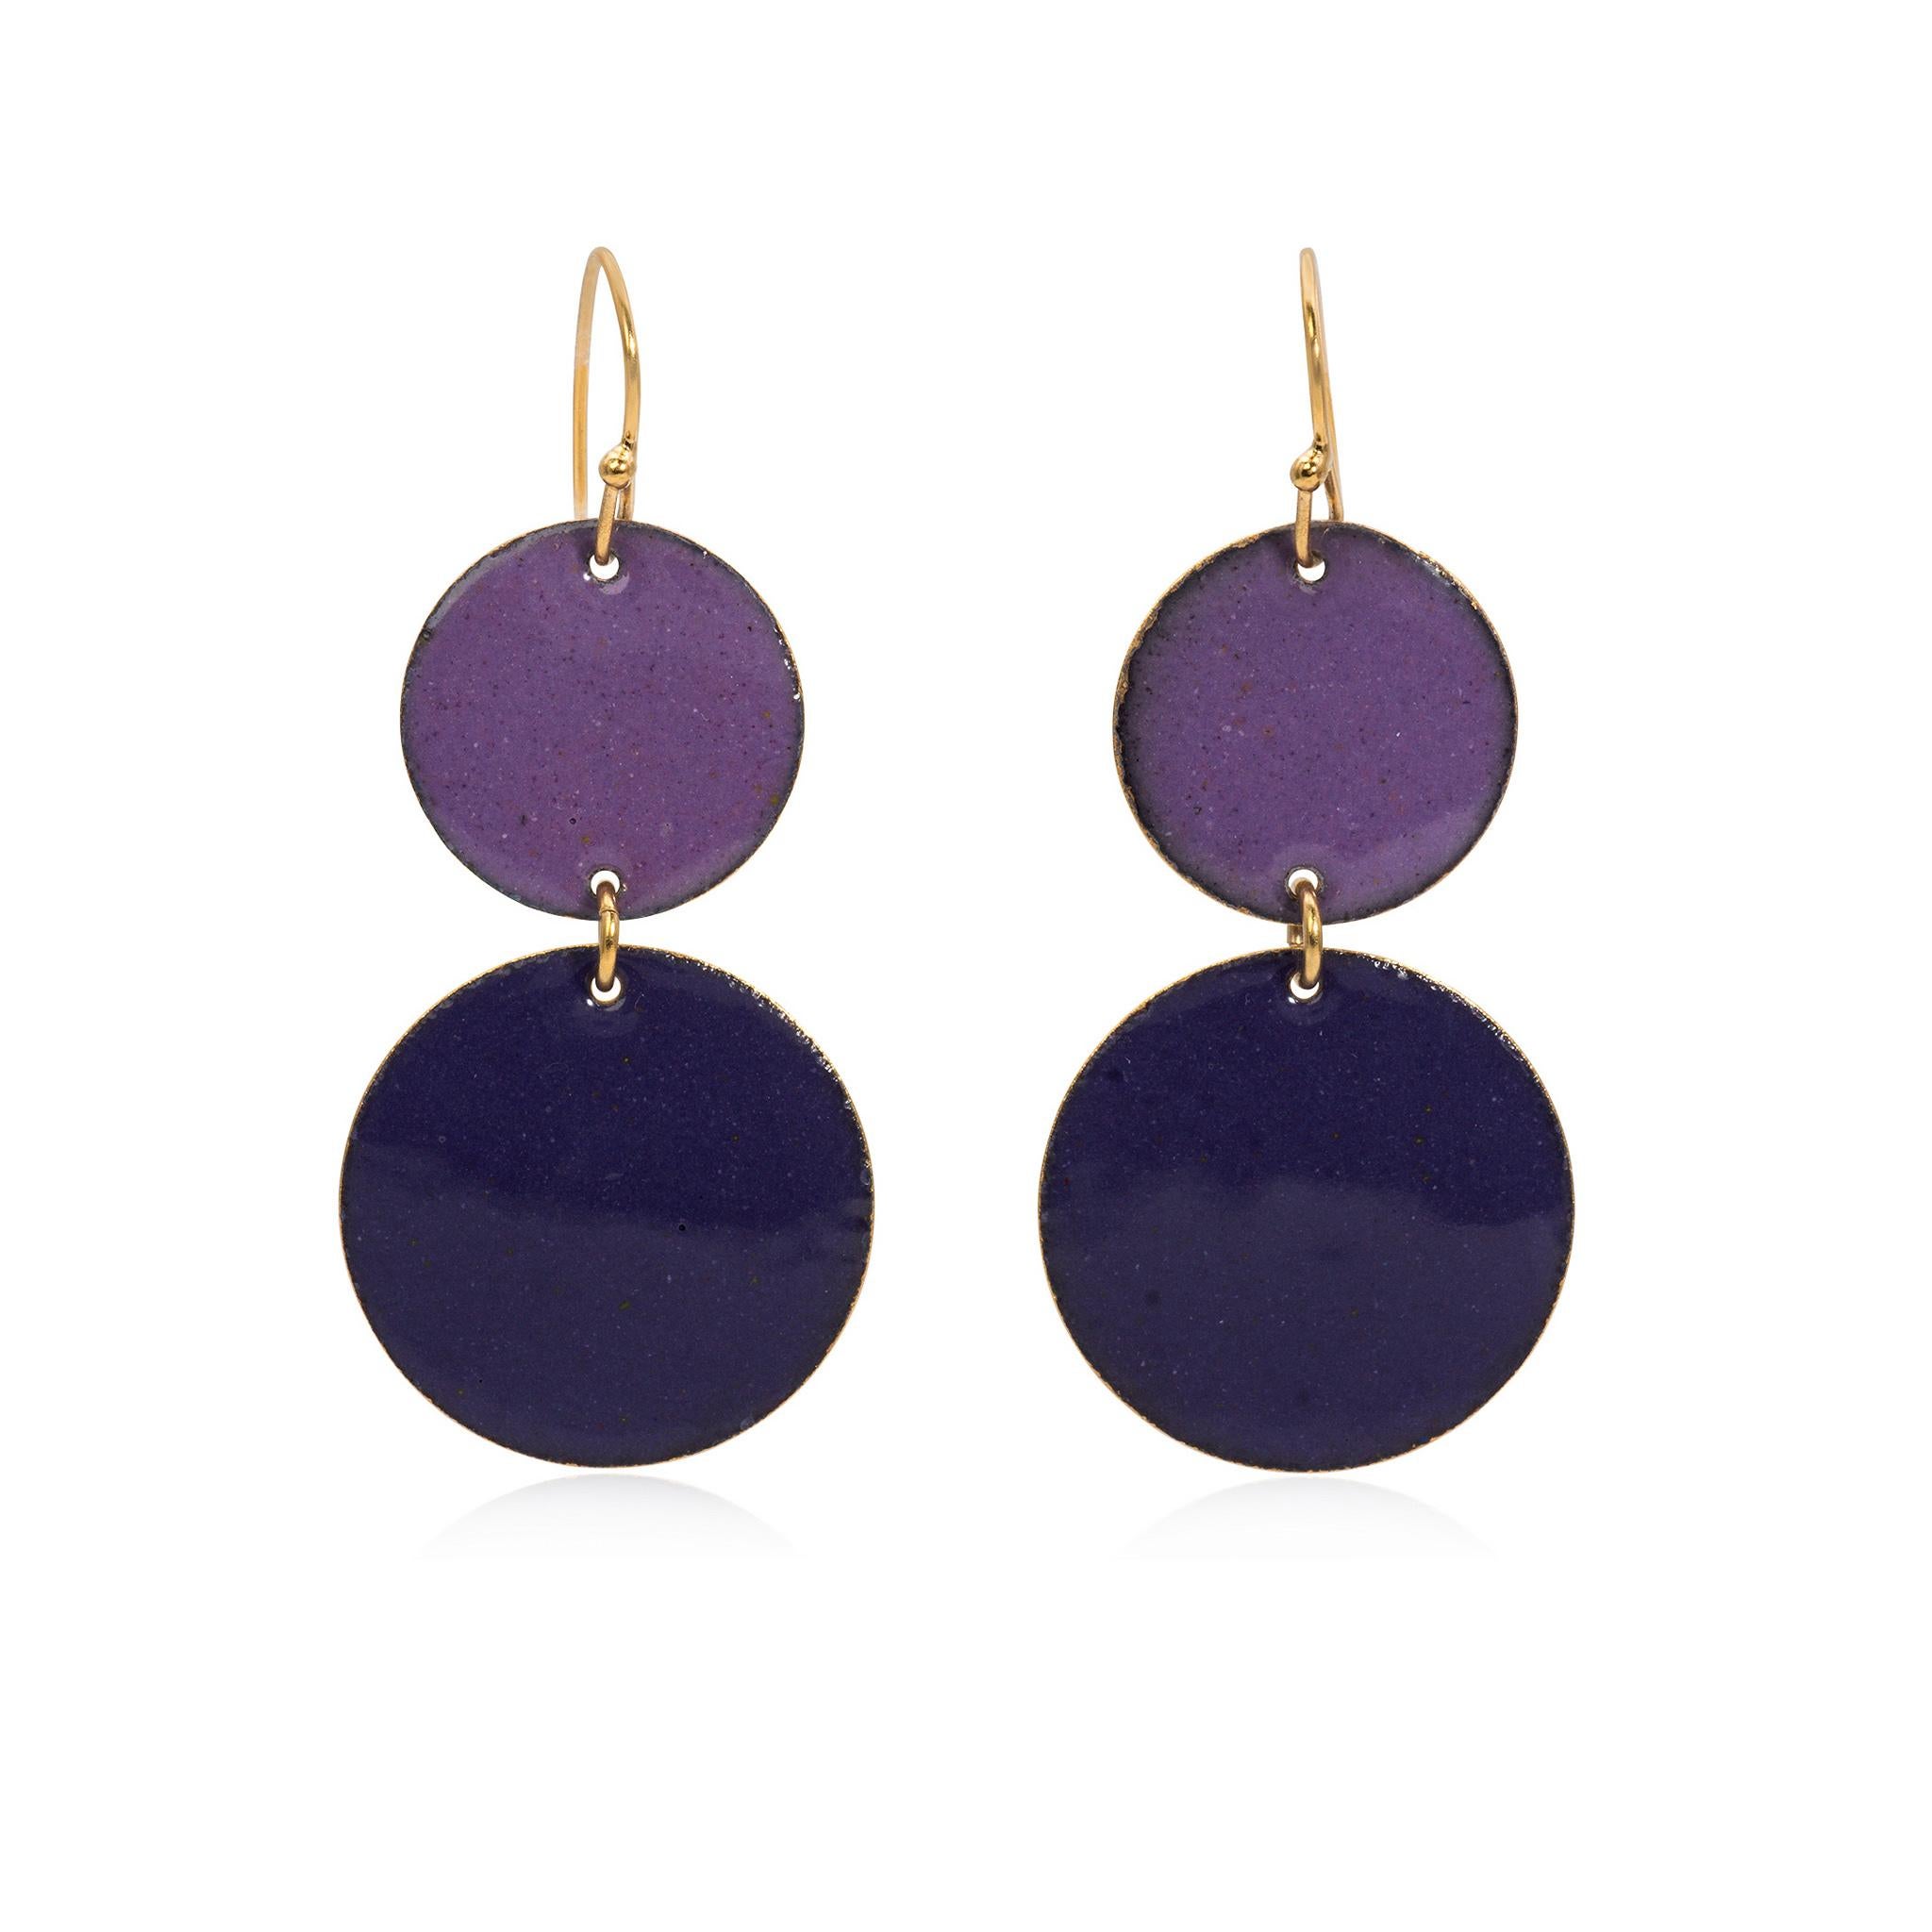 These stunning Deep Purple Hand Painted Copper Enamel Discs with Gold Vermeil from April in Paris designs are sure to draw attention.  The discs are .75 and 1 inch in diameter. 
Earrings can be made in the colors of your choice with 2 or 3 discs (at